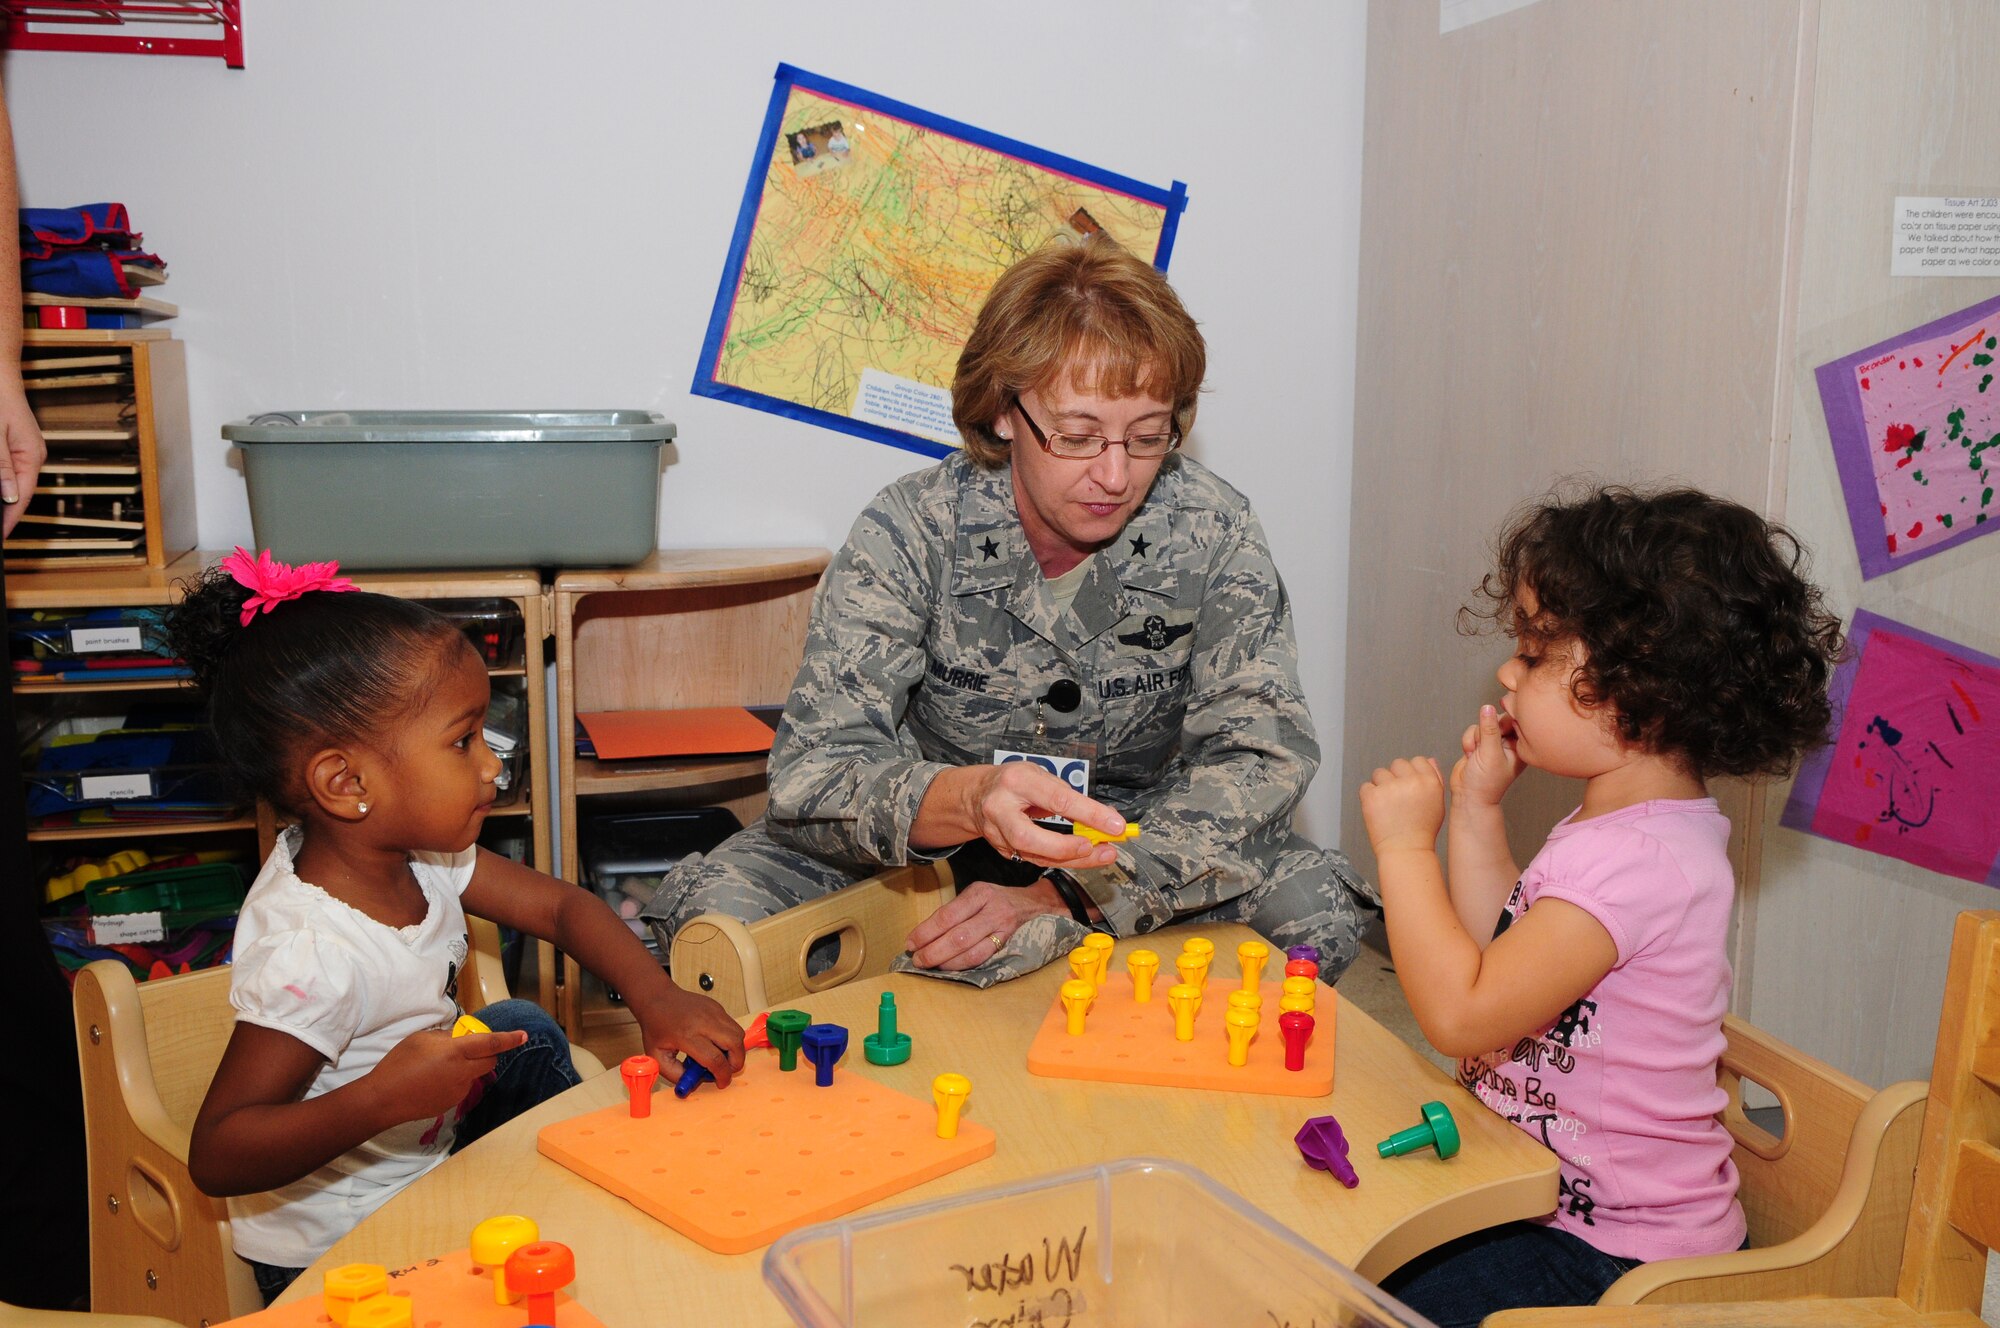 SPANGDAHLEM AIR BASE, Germany – Brig. Gen. Eden Murrie, director of Air Force Services, plays with some children during her visit to the child development center here Sept. 9. General Murrie visited various facilities and flights within the 52nd Force Support Squadron to familiarize herself with how the 52nd Fighter Wing takes care of its Airmen and their families. (U.S. Air Force photo/Airman 1st Class Matthew B. Fredericks)